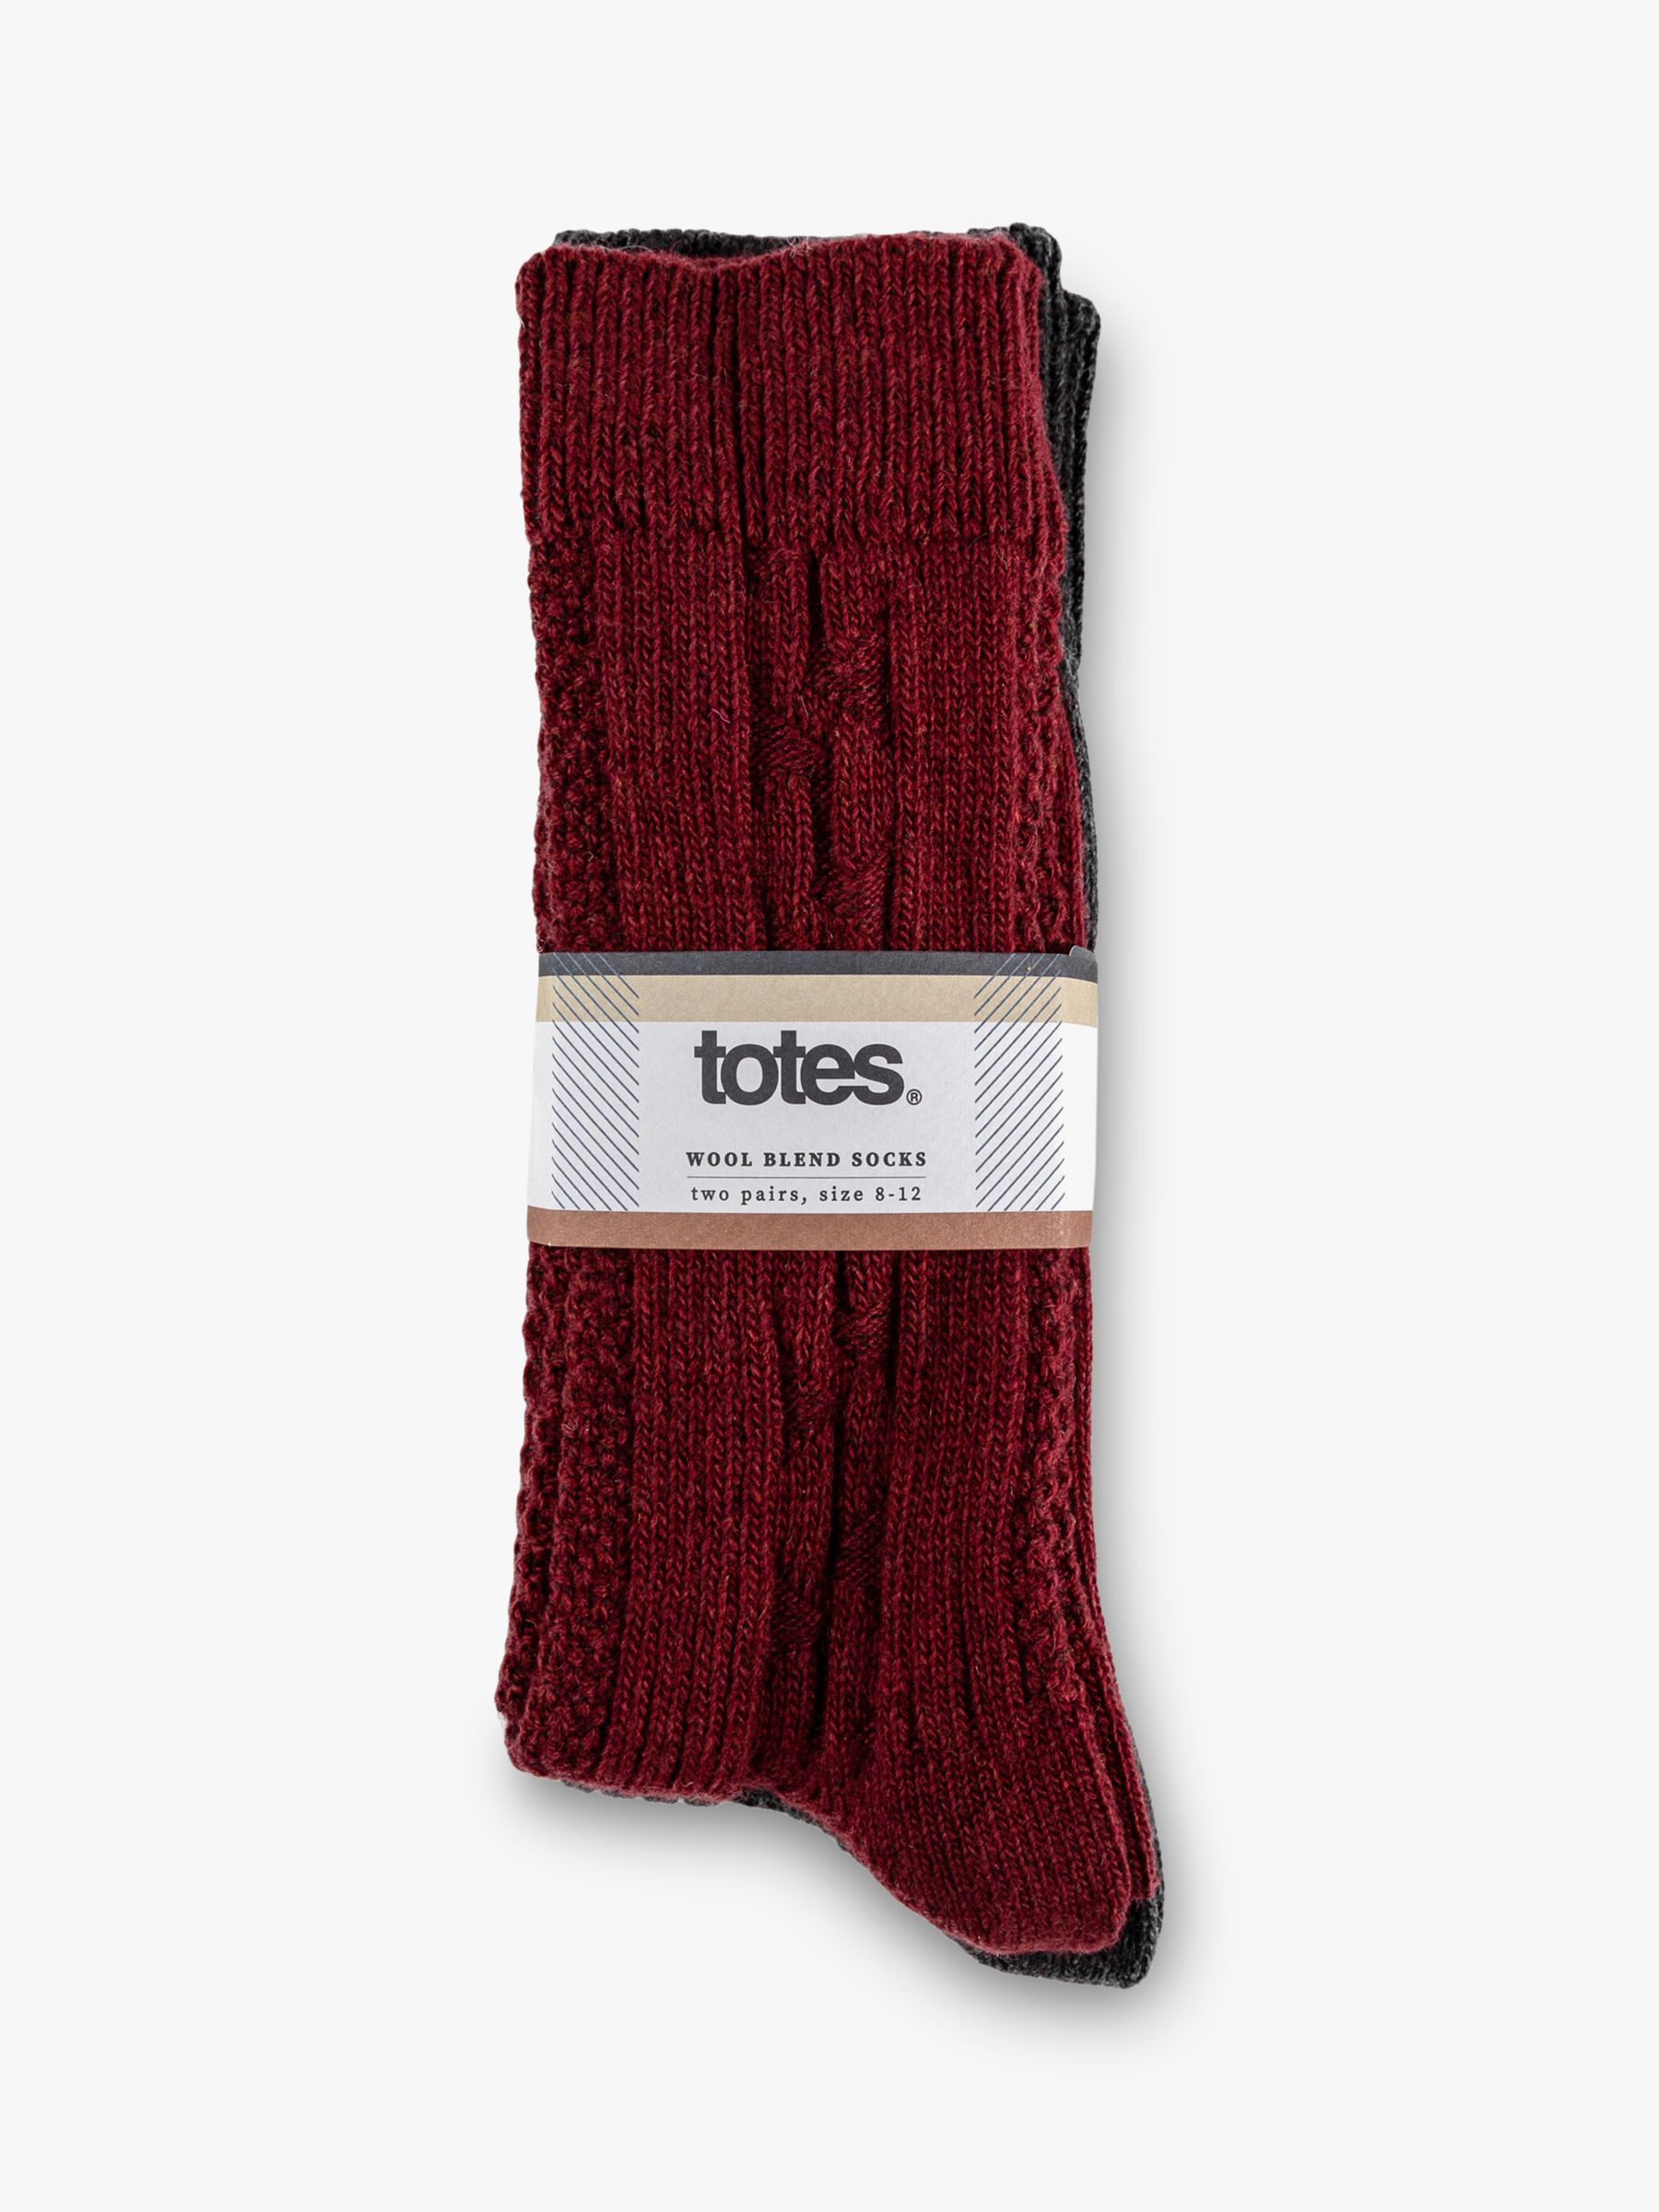 totes Cable Knit Socks, Pack of 2, Burgundy/Charcoal at John Lewis ...